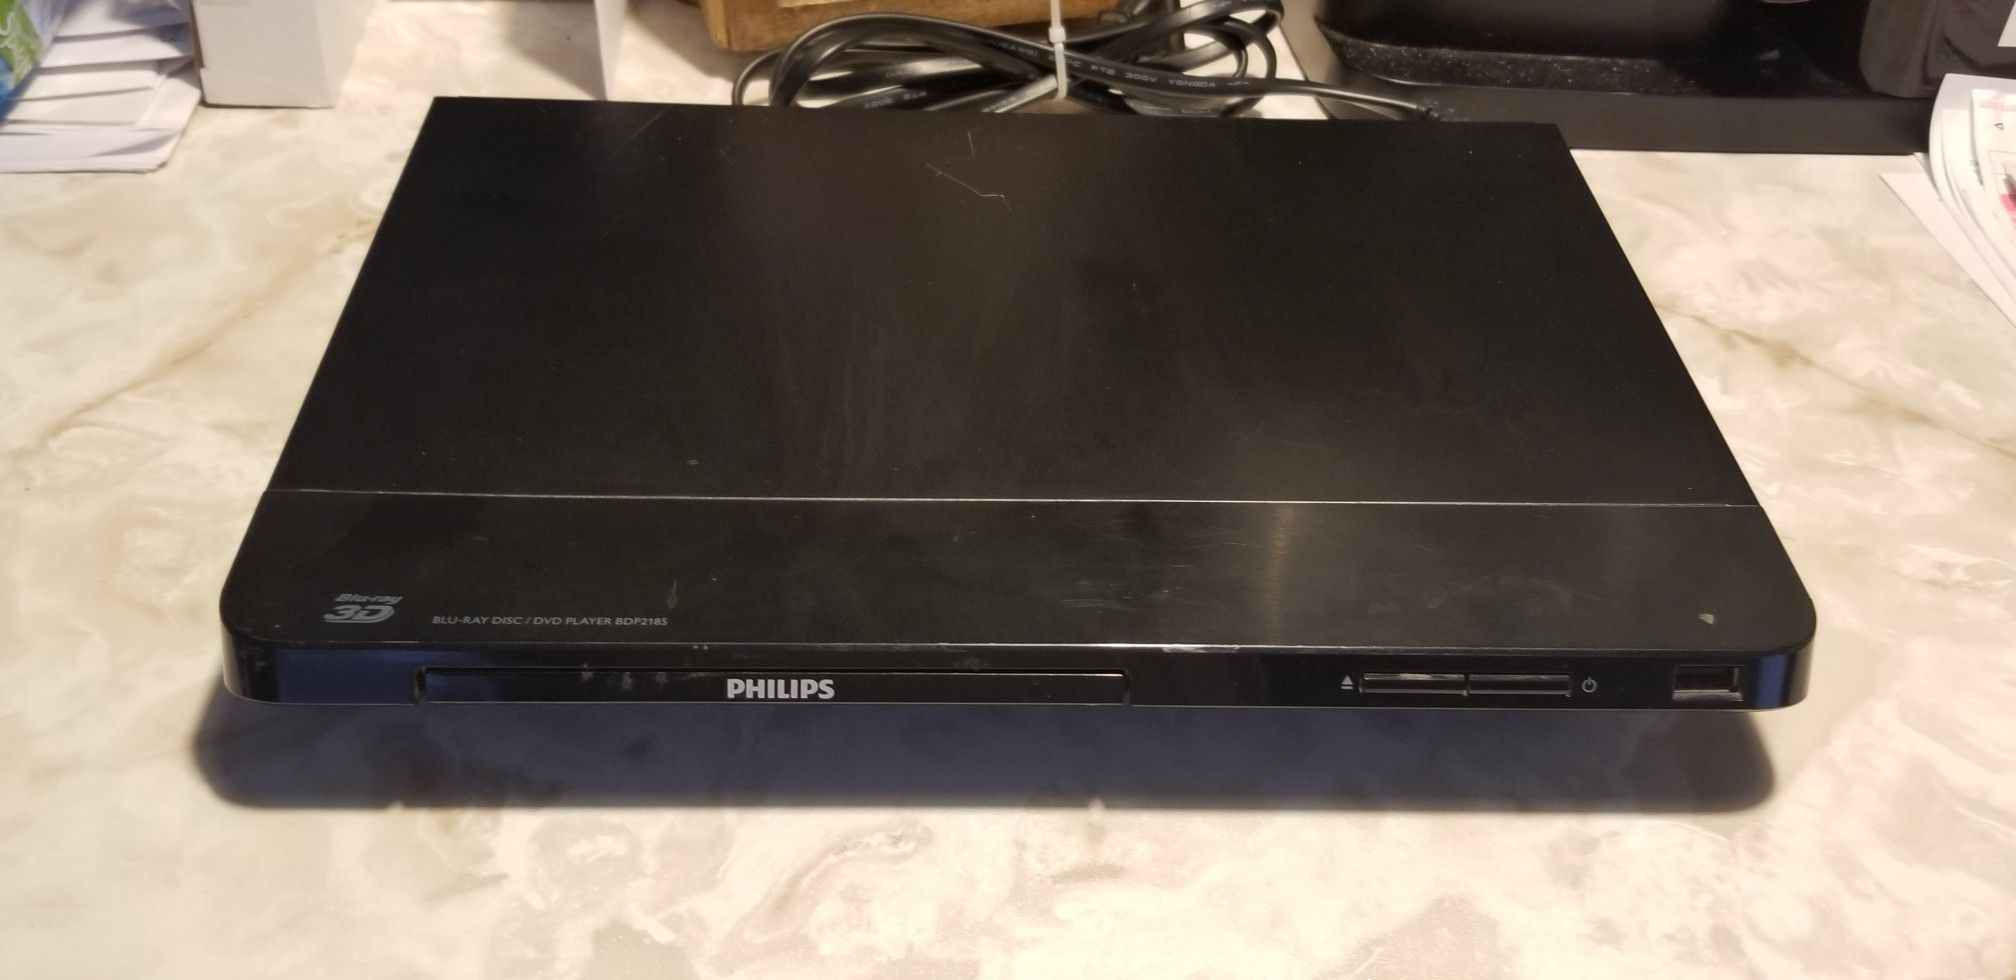 Phillip Blue-Ray Disc DVD Player Model BDP2185/F7